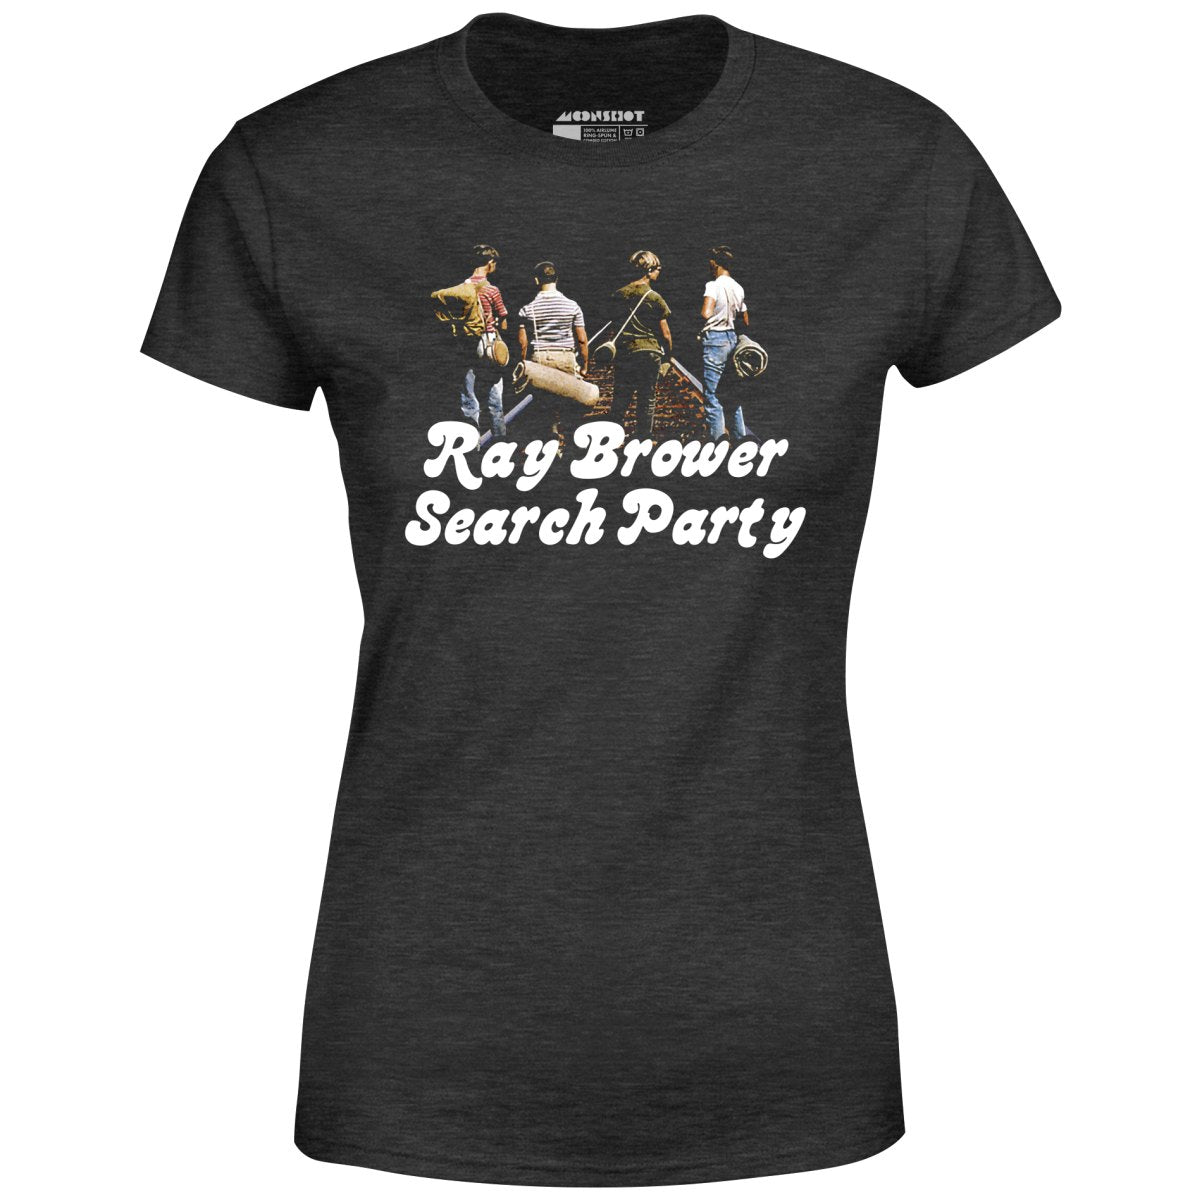 Ray Brower Search Party - Women's T-Shirt